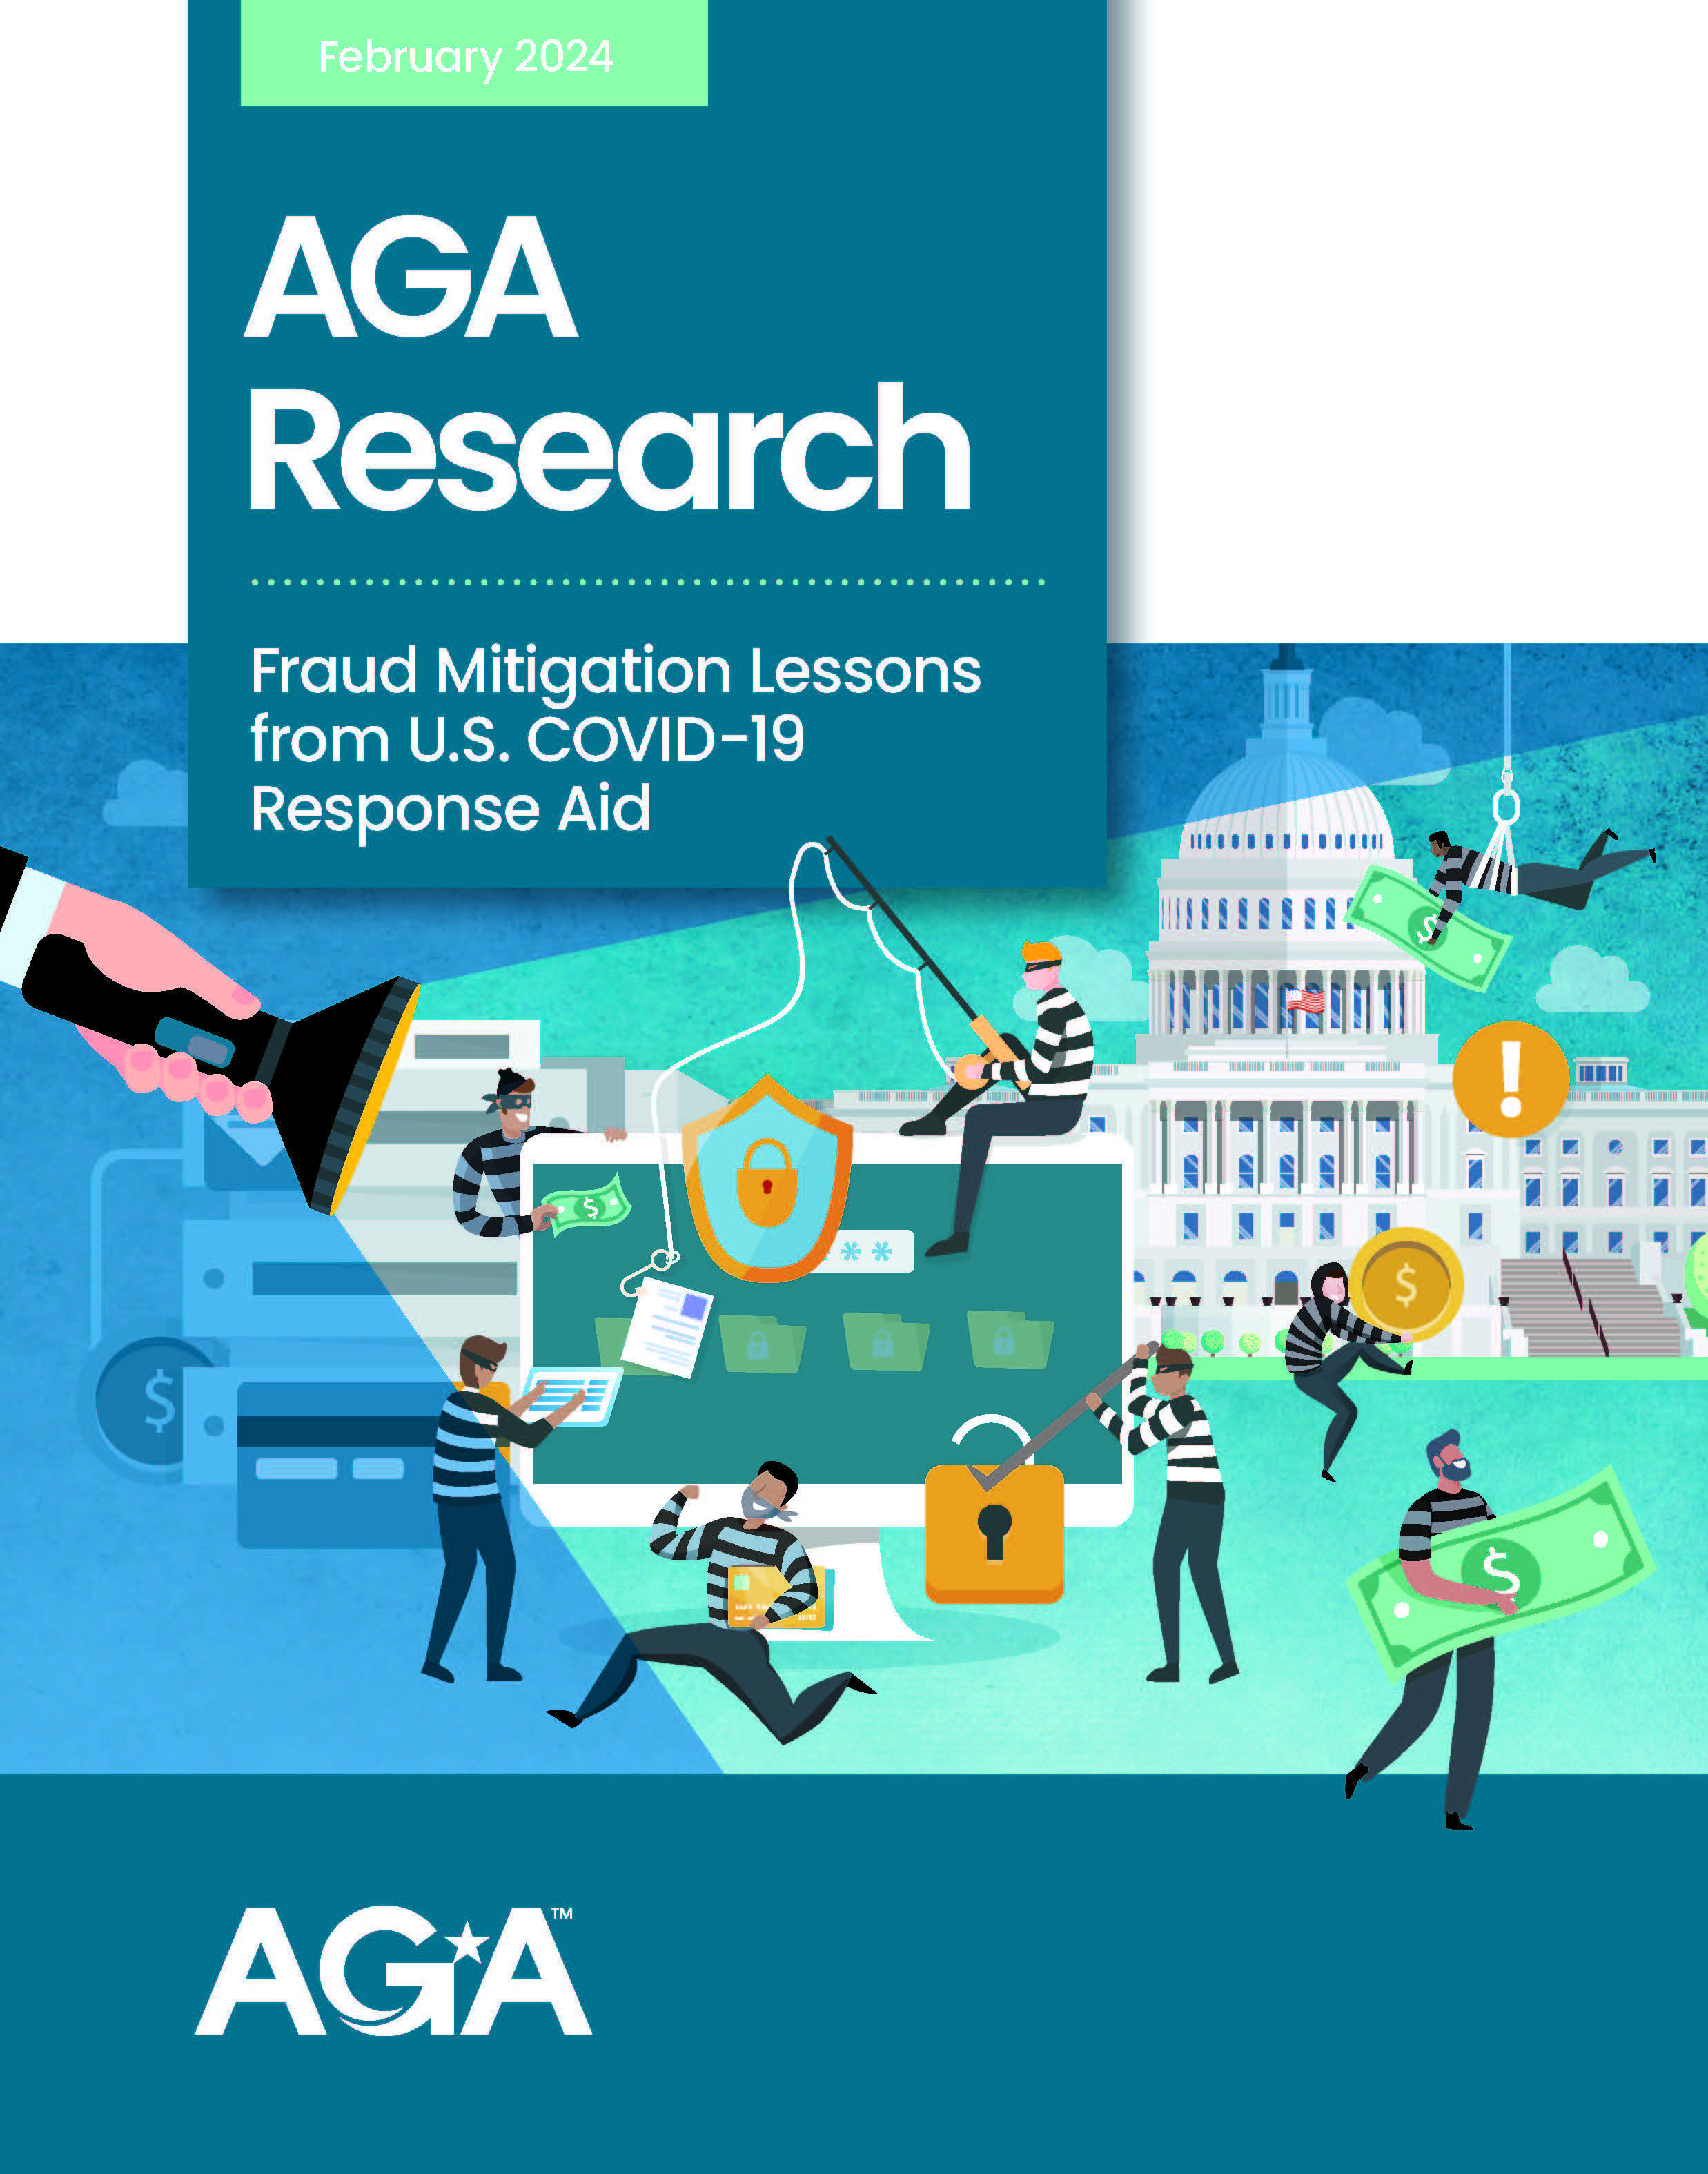 Fraud Mitigation Lessons from U.S. COVID-19 Response Aid